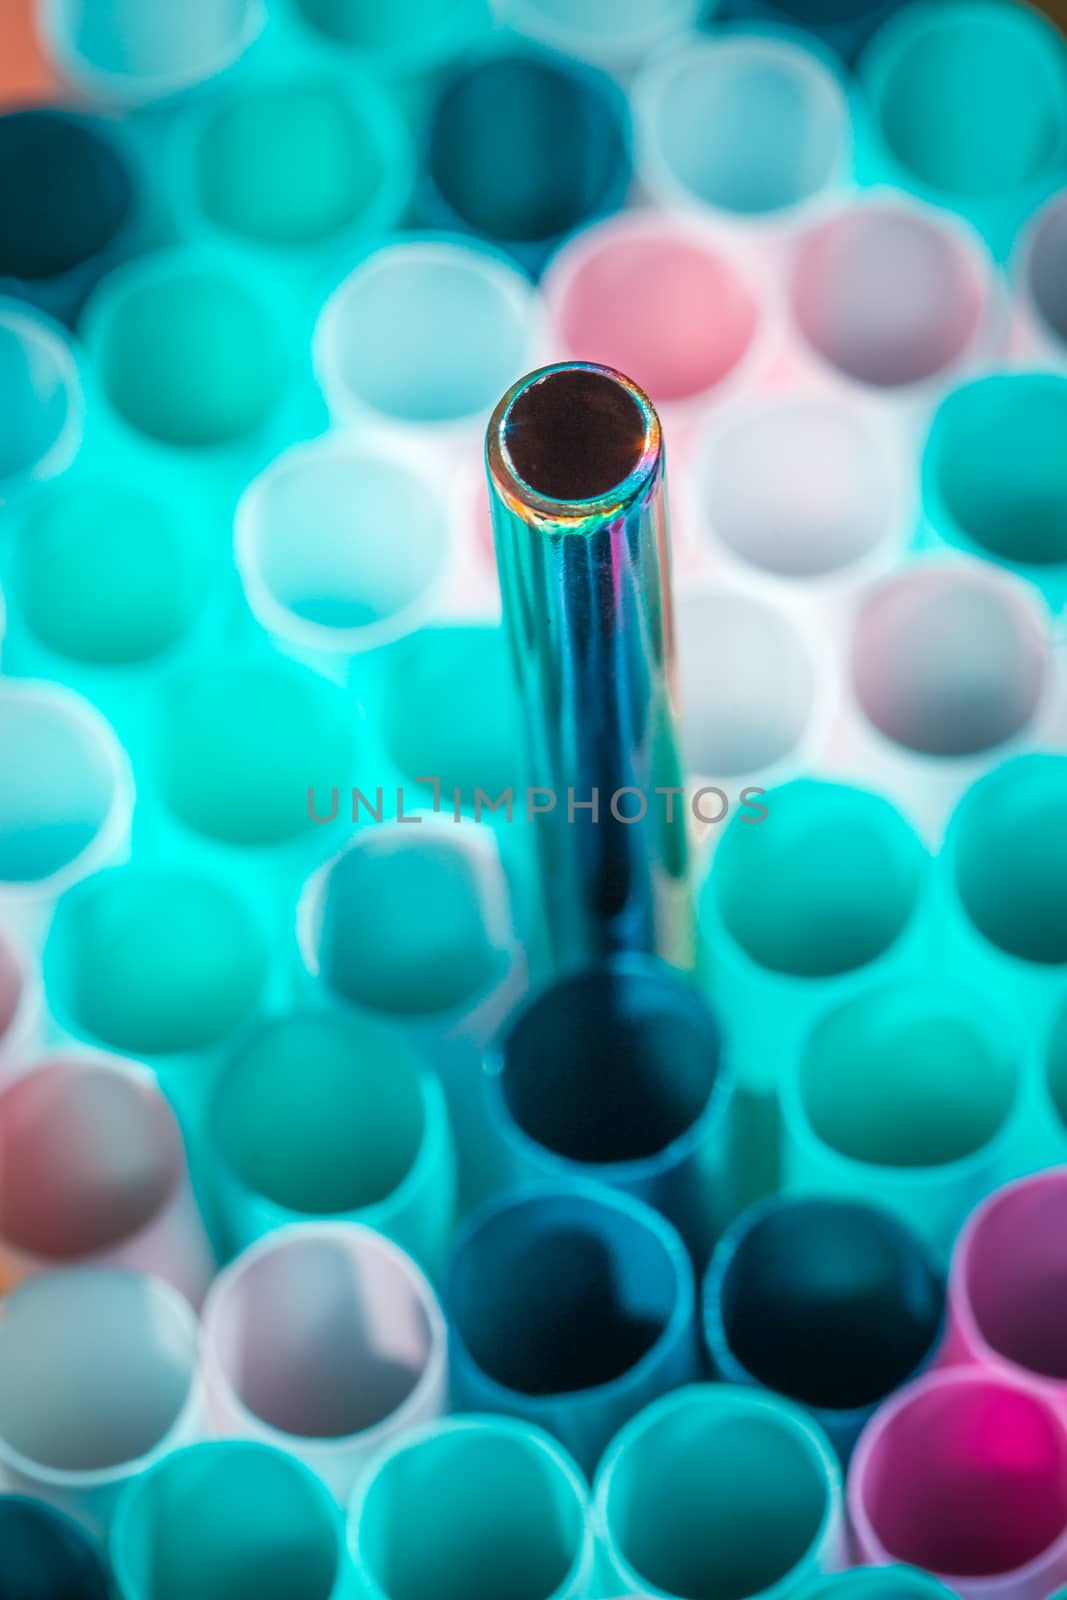 plastic and metal straw on colorful background.